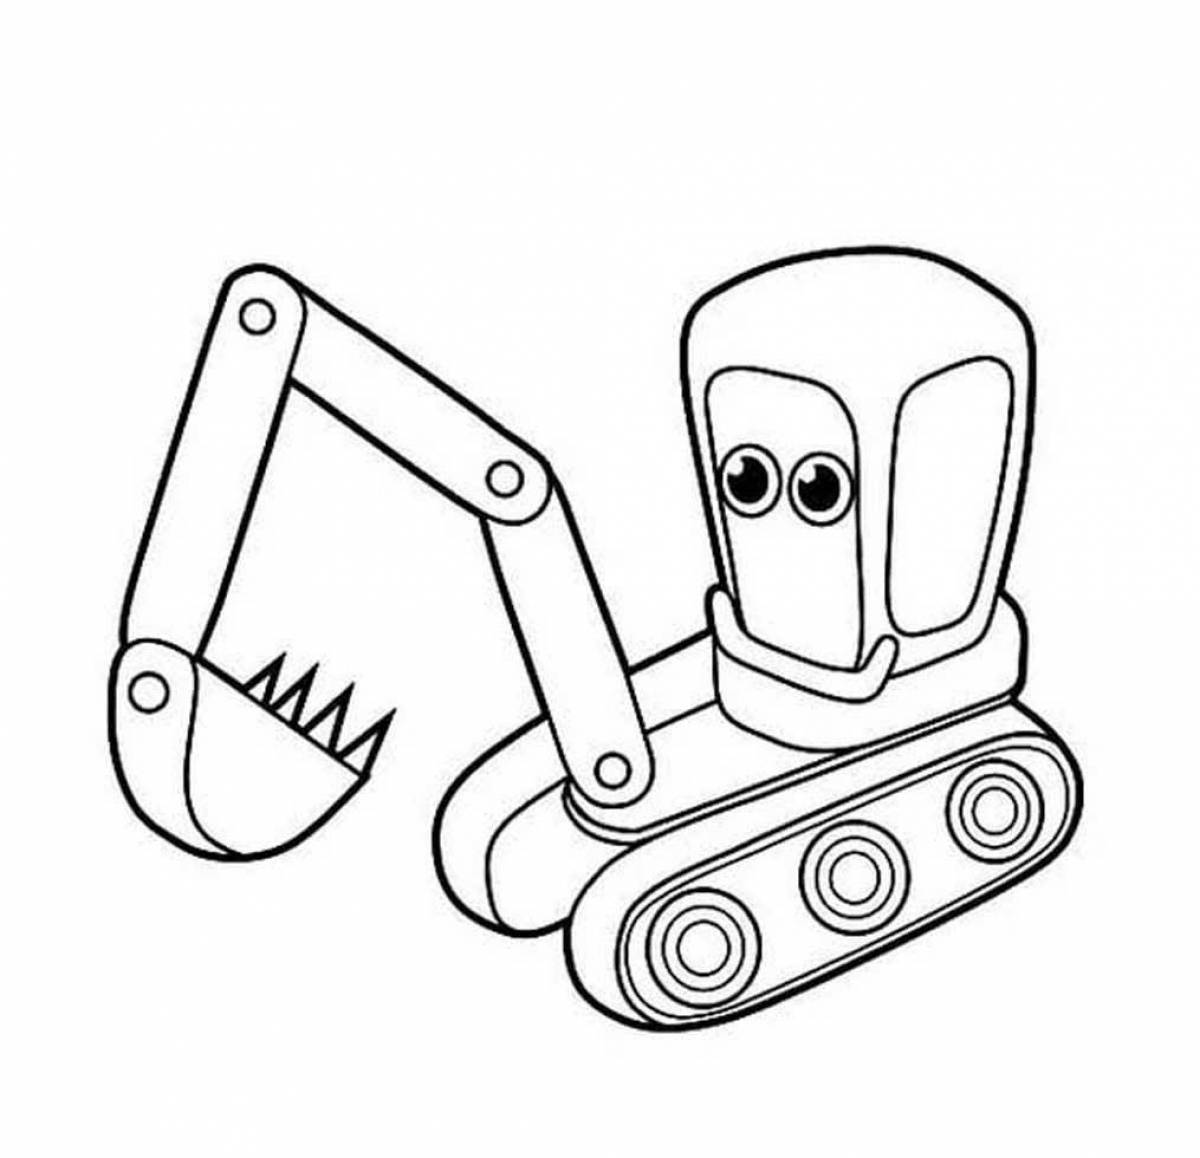 Awesome excavator coloring book for toddlers